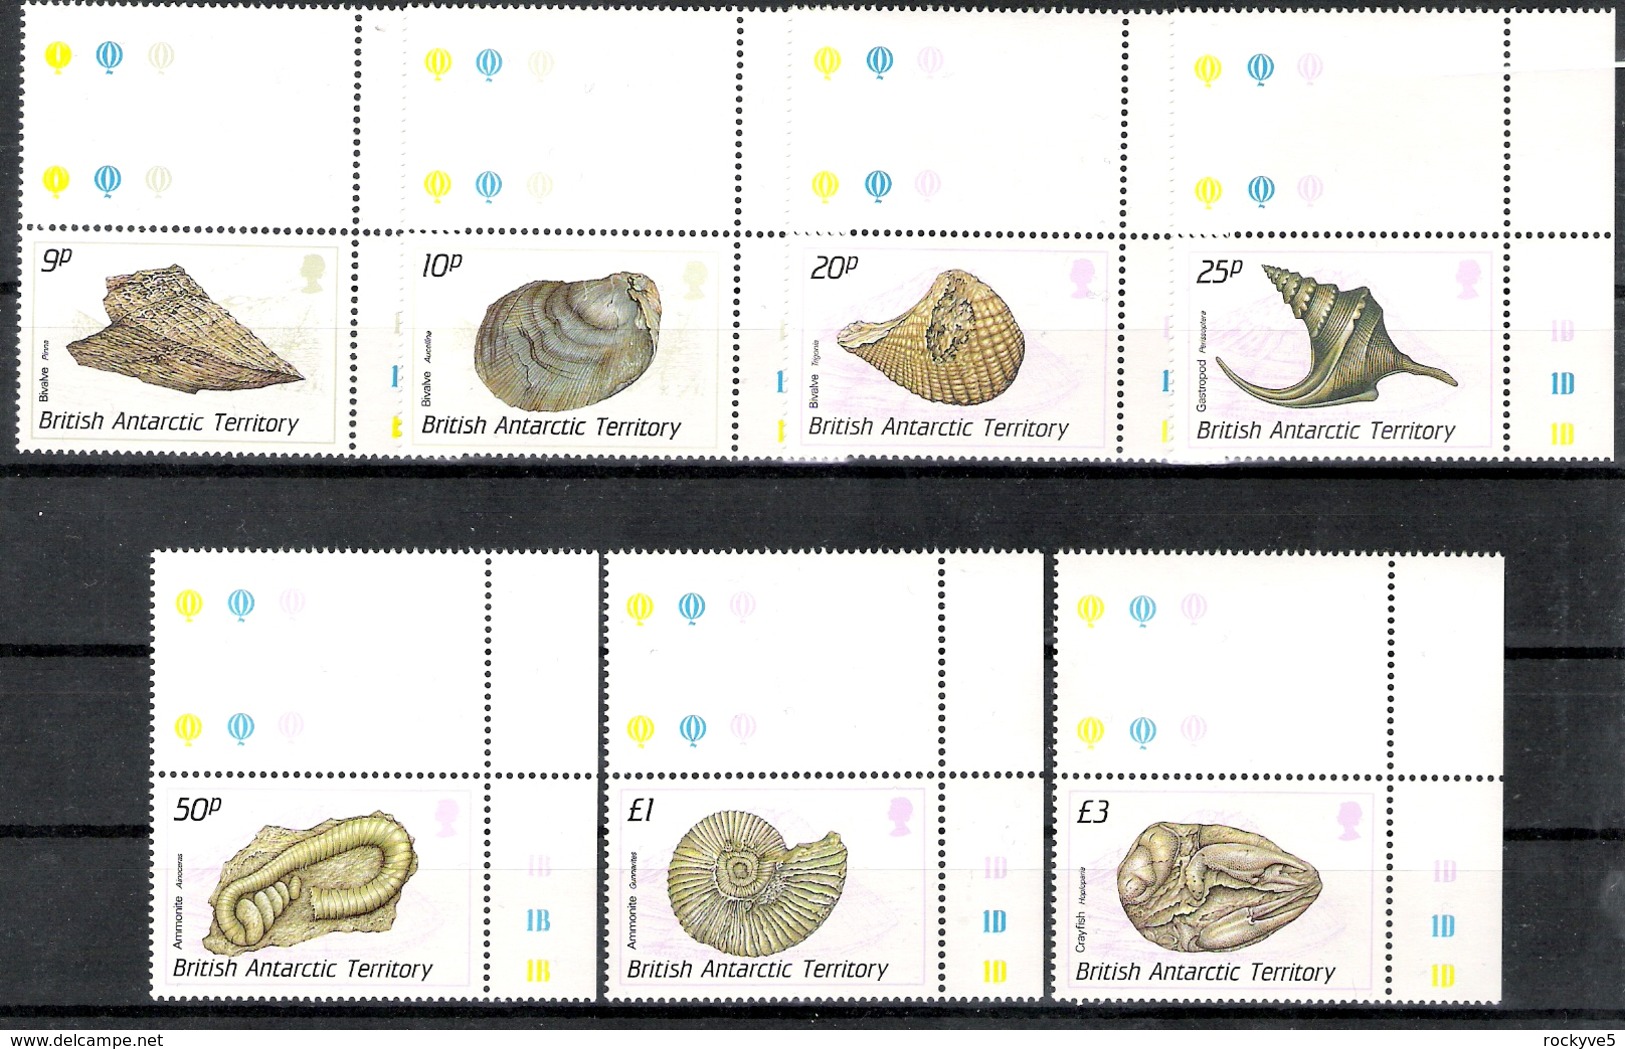 British Antarctic Territory 1990 Fossil Definitives Gutter Singles MNH CV £33.25 (2 Scans) - Unused Stamps